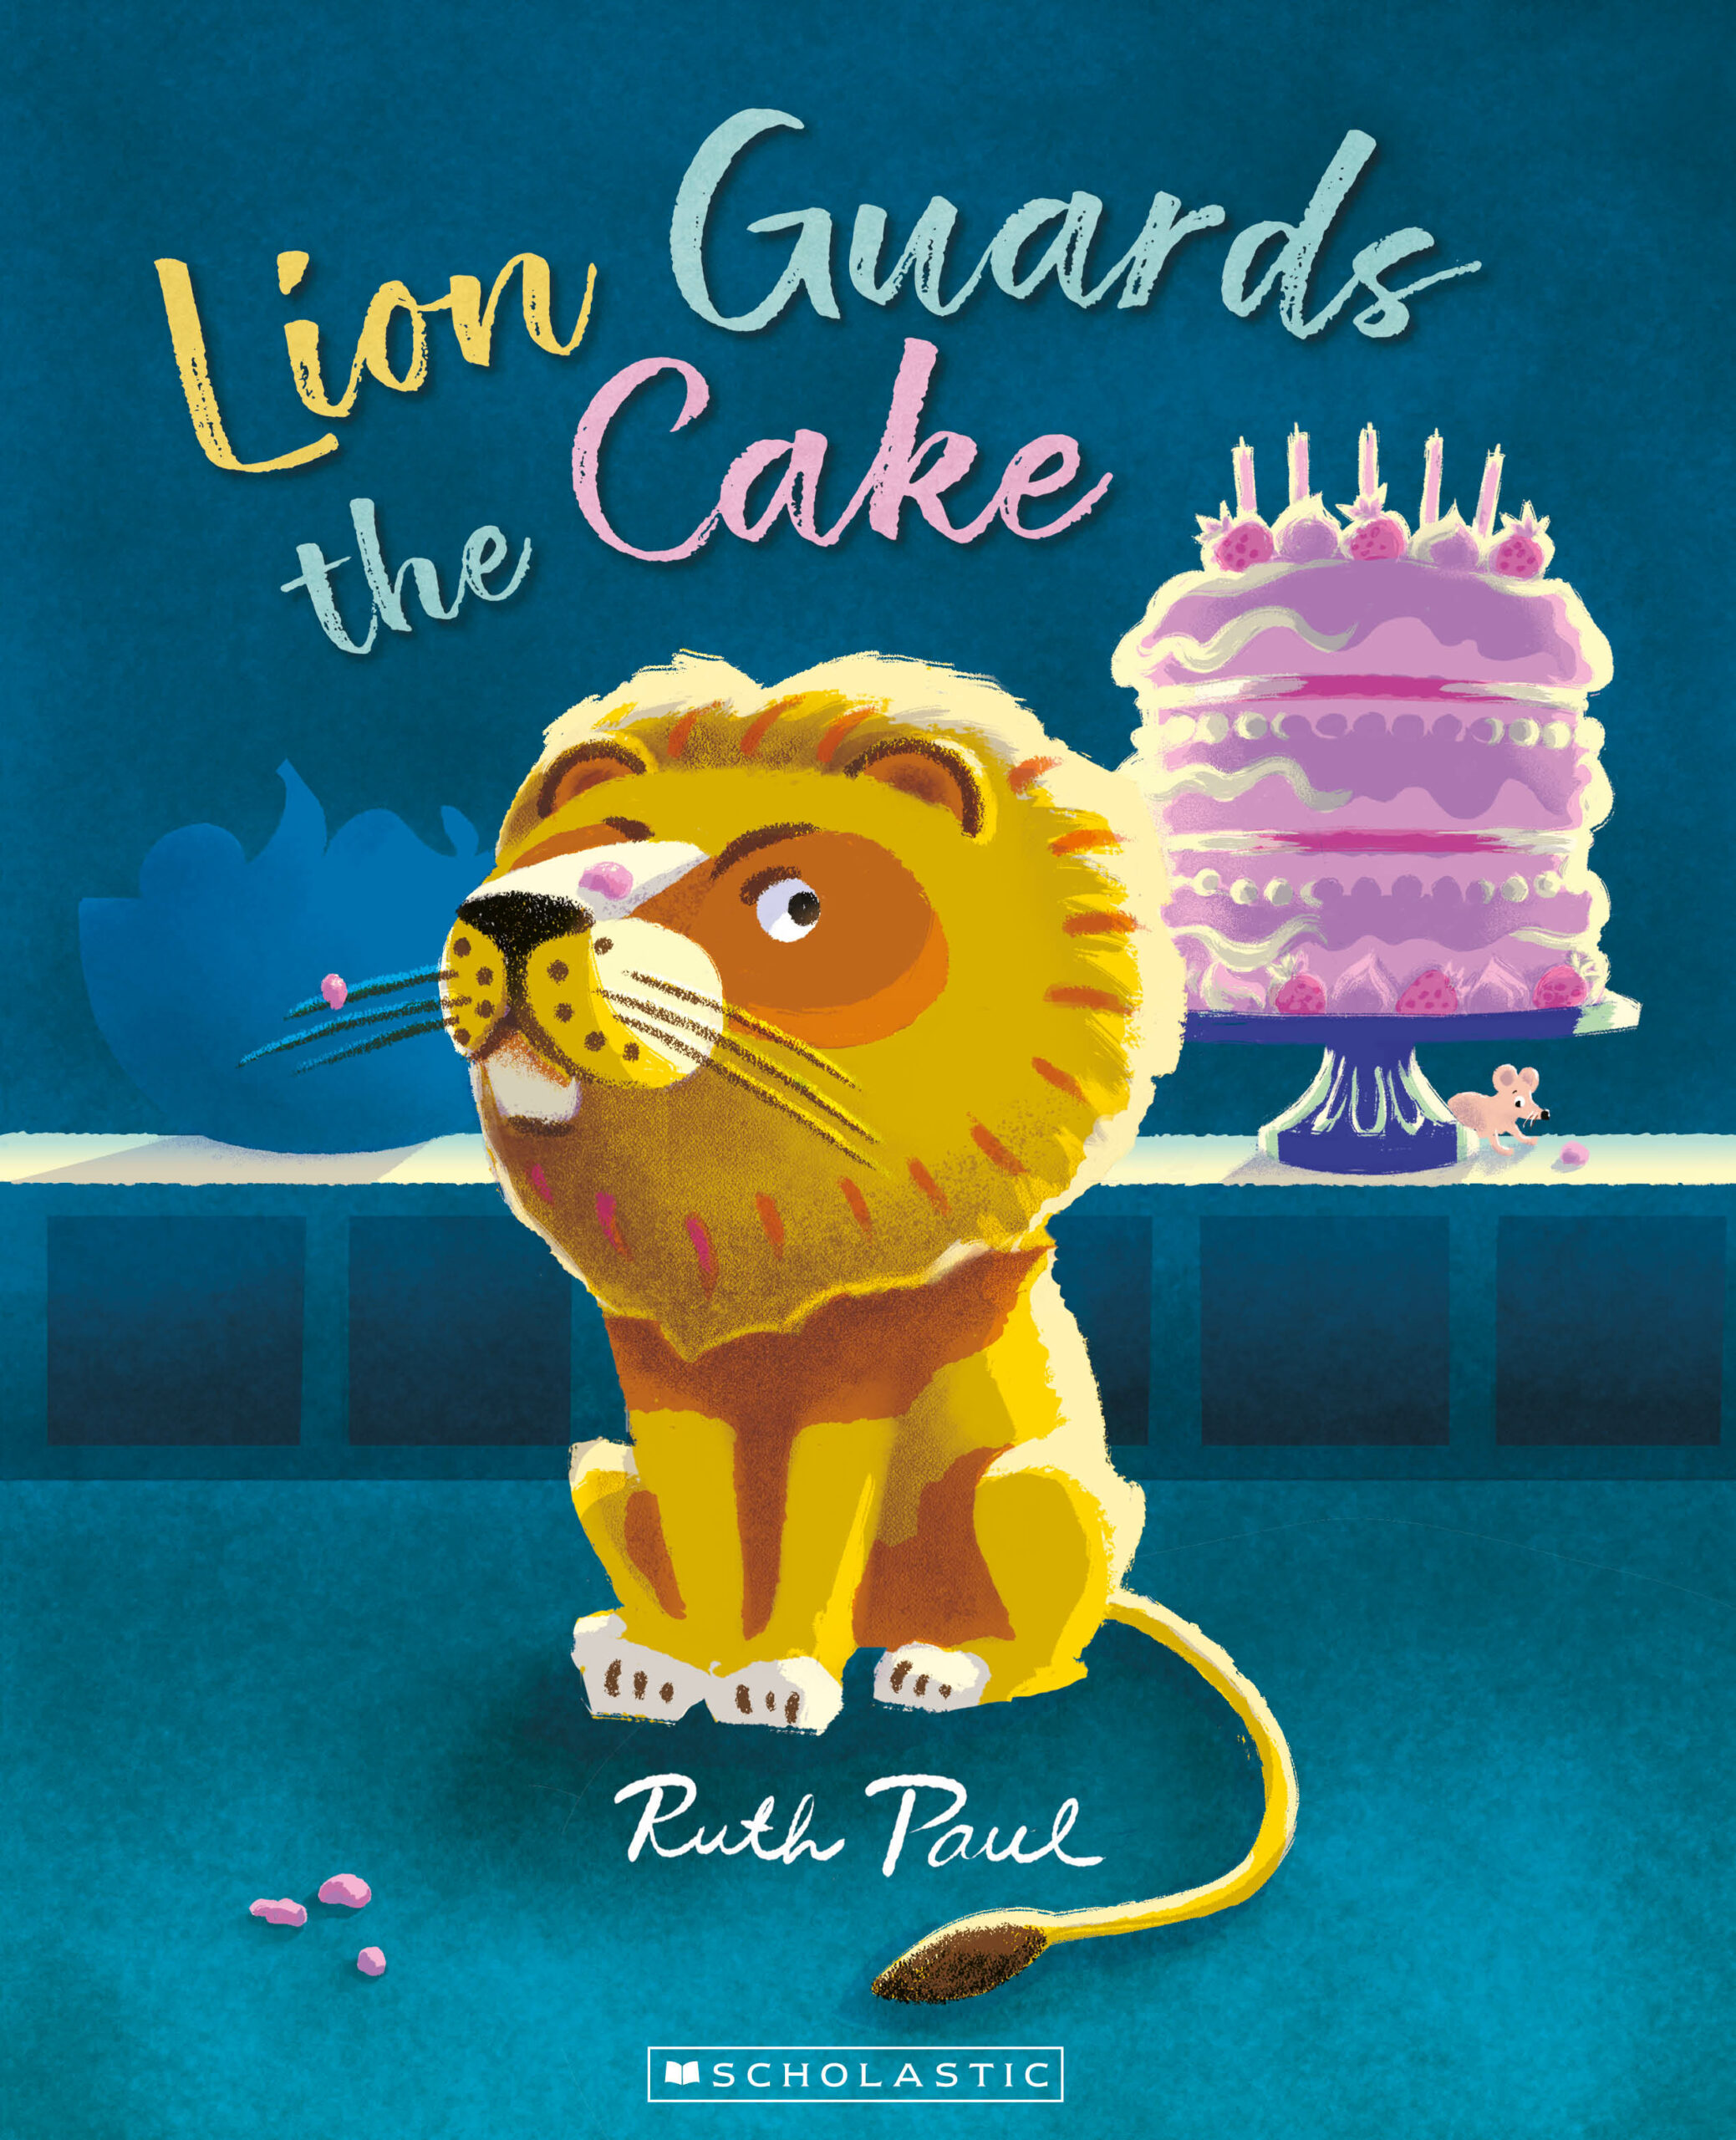 Lion Guards the Cake